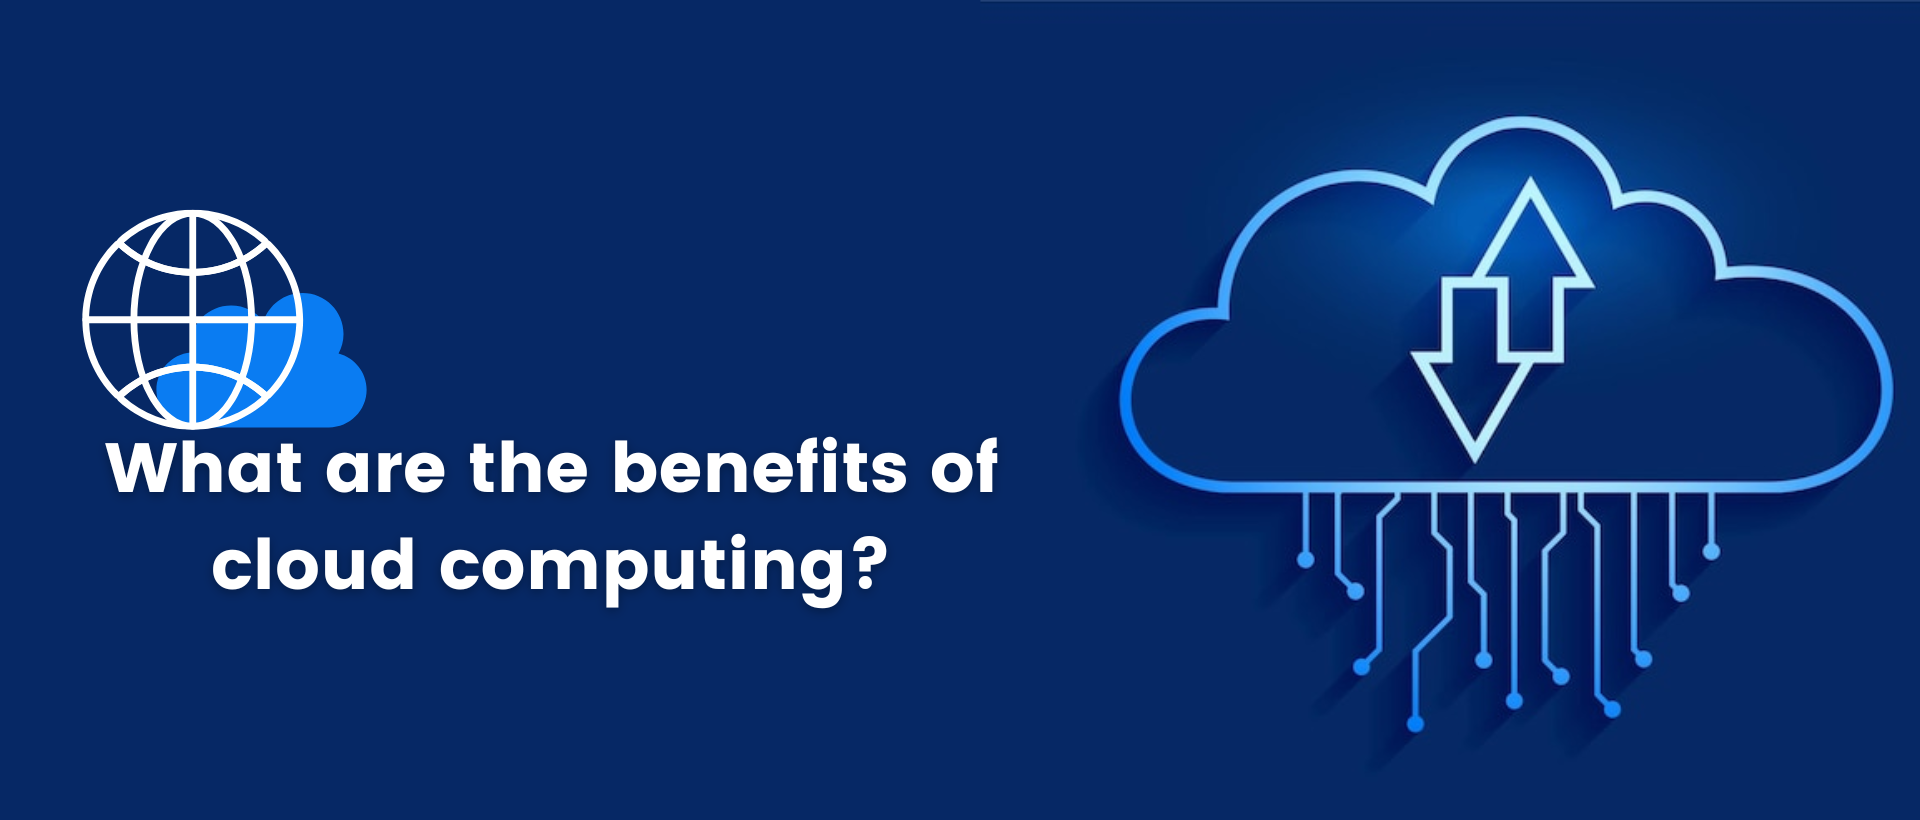 What are the benefits of cloud computing?